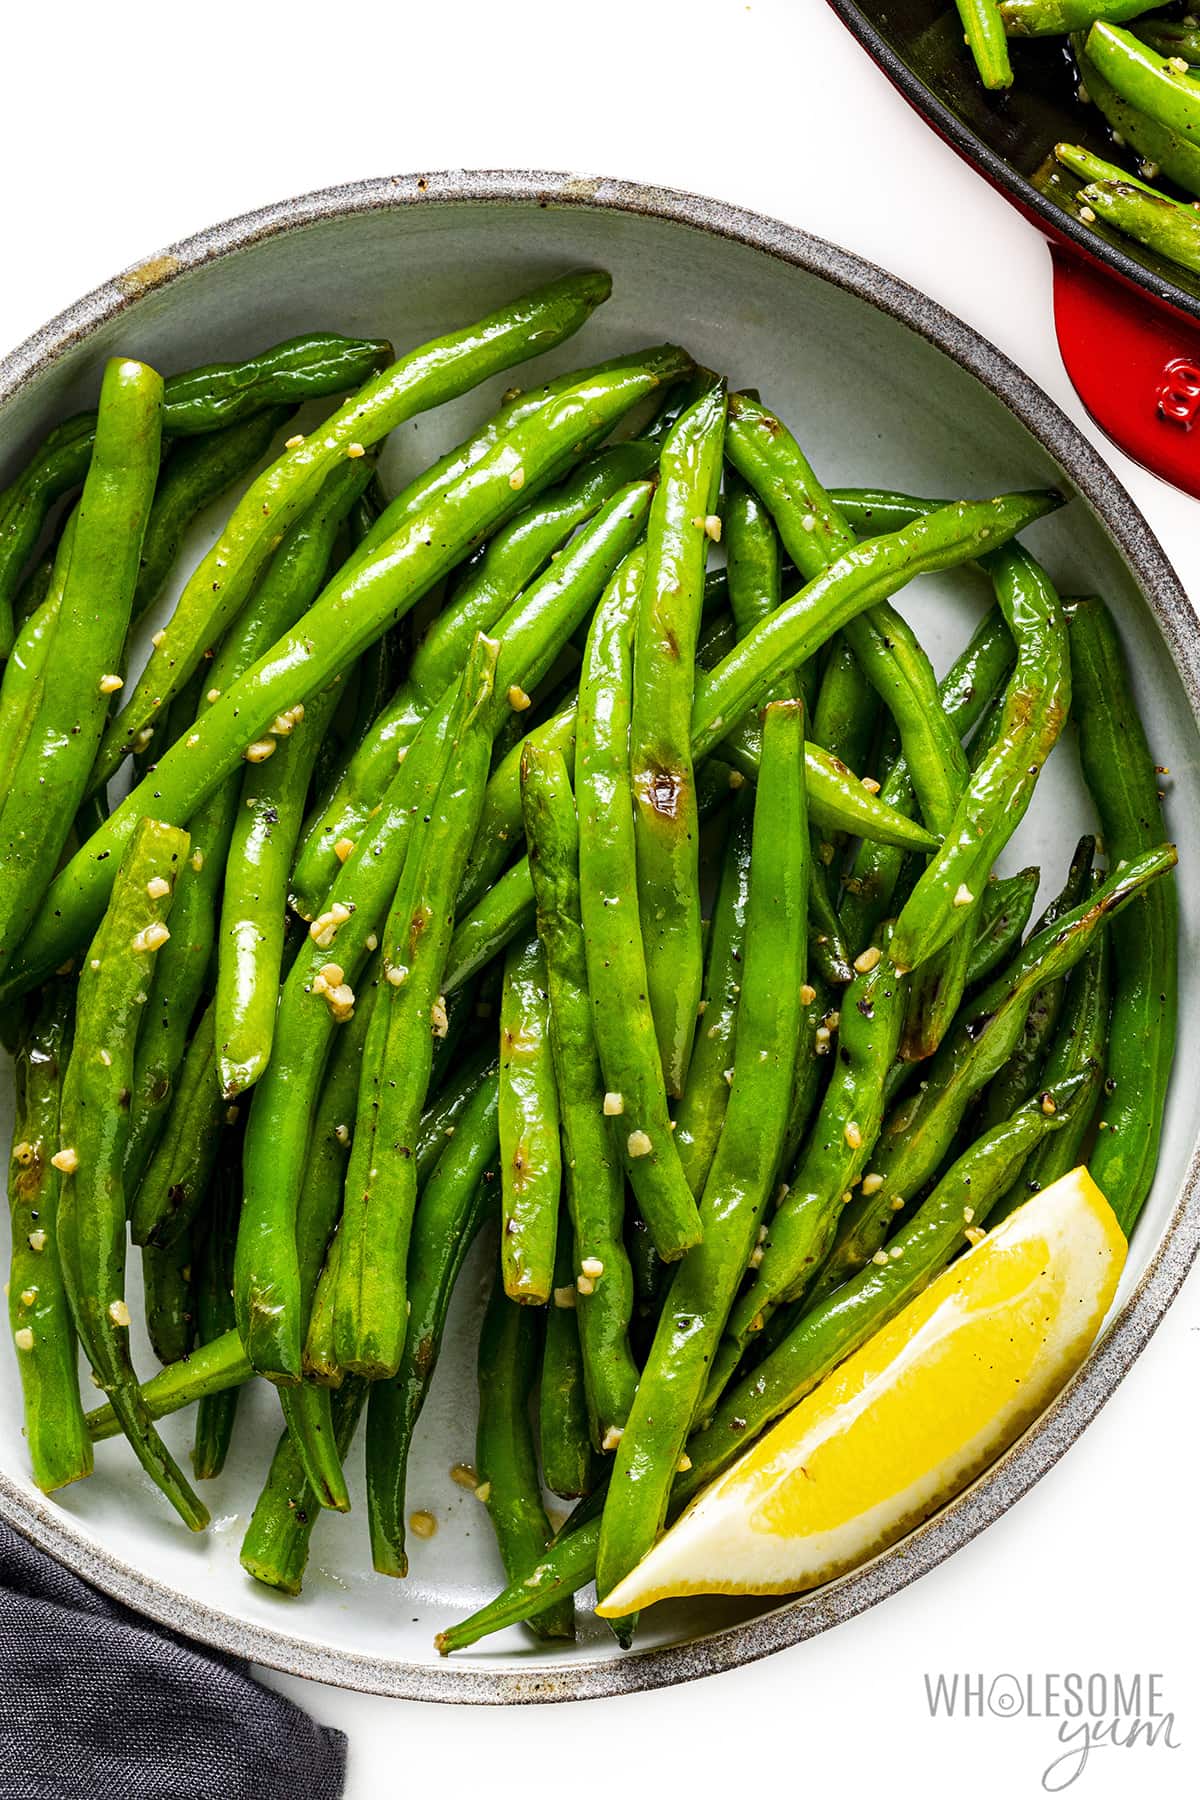 Sauté the green beans in a bowl with the garlic and lemon.